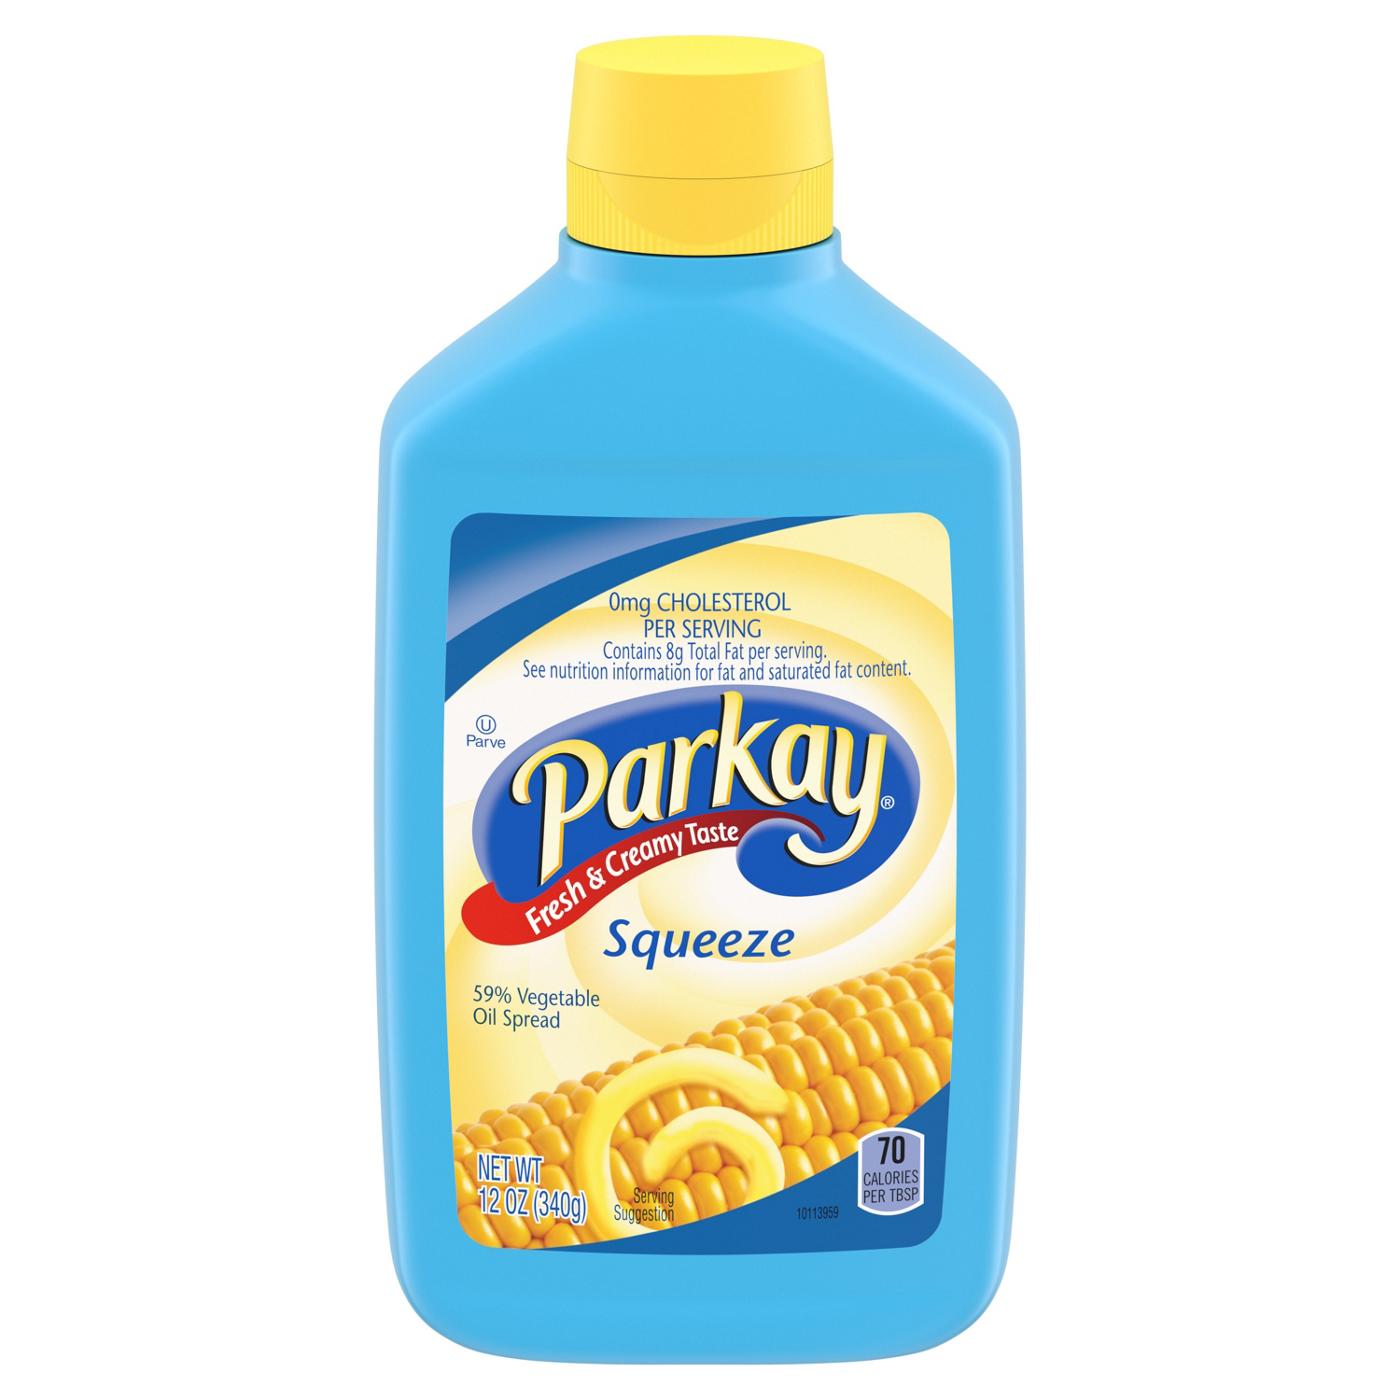 Parkay Squeeze Vegetable Oil Spread; image 1 of 4